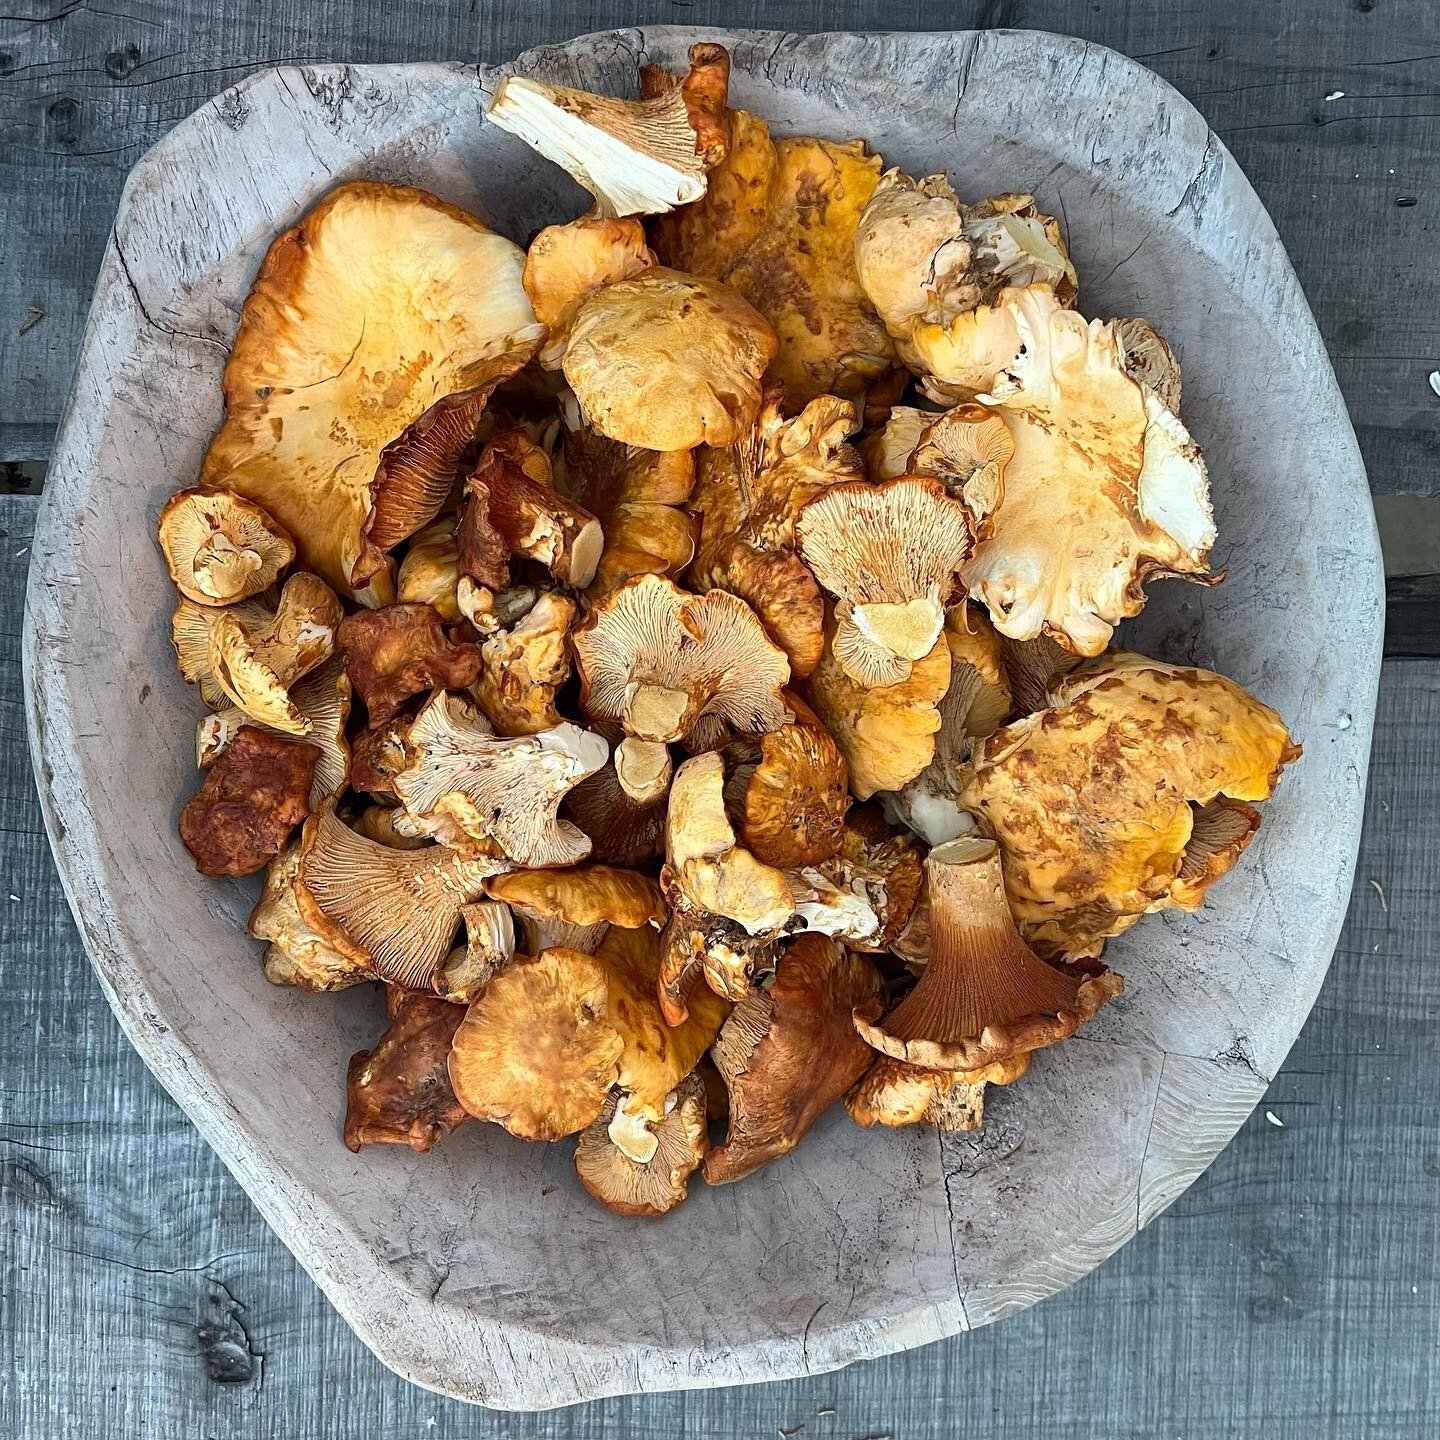 Chanterelle Madness began and ended in one fell swoop. Thanks for that one great rain, but please sky, may we have another?